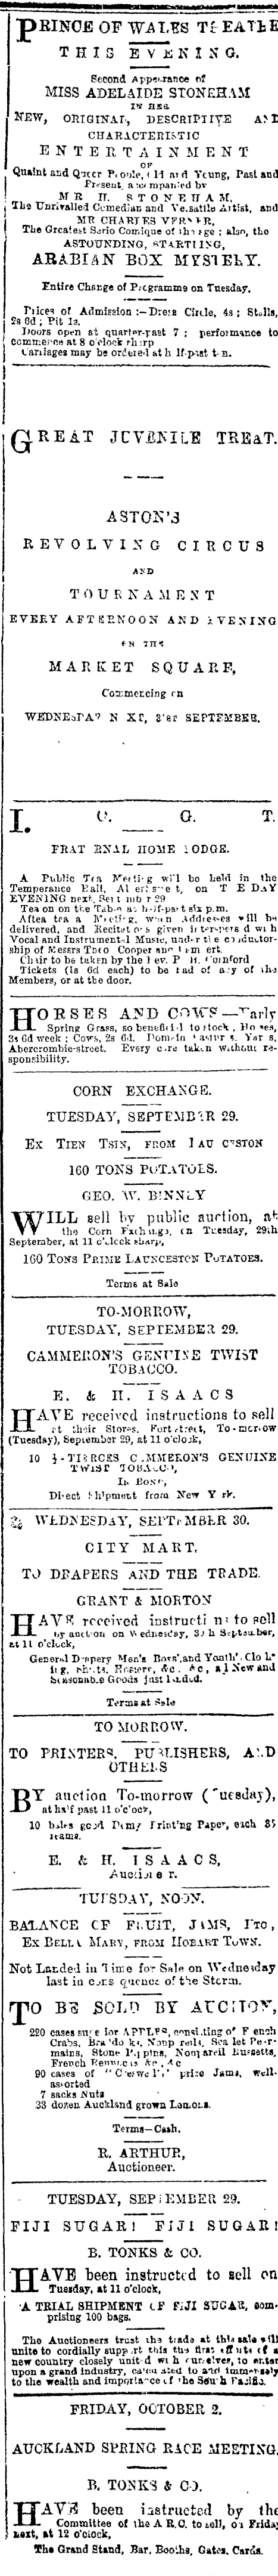 Papers Past Newspapers Auckland Star 28 September 1874 Page 3 Advertisements Column 6